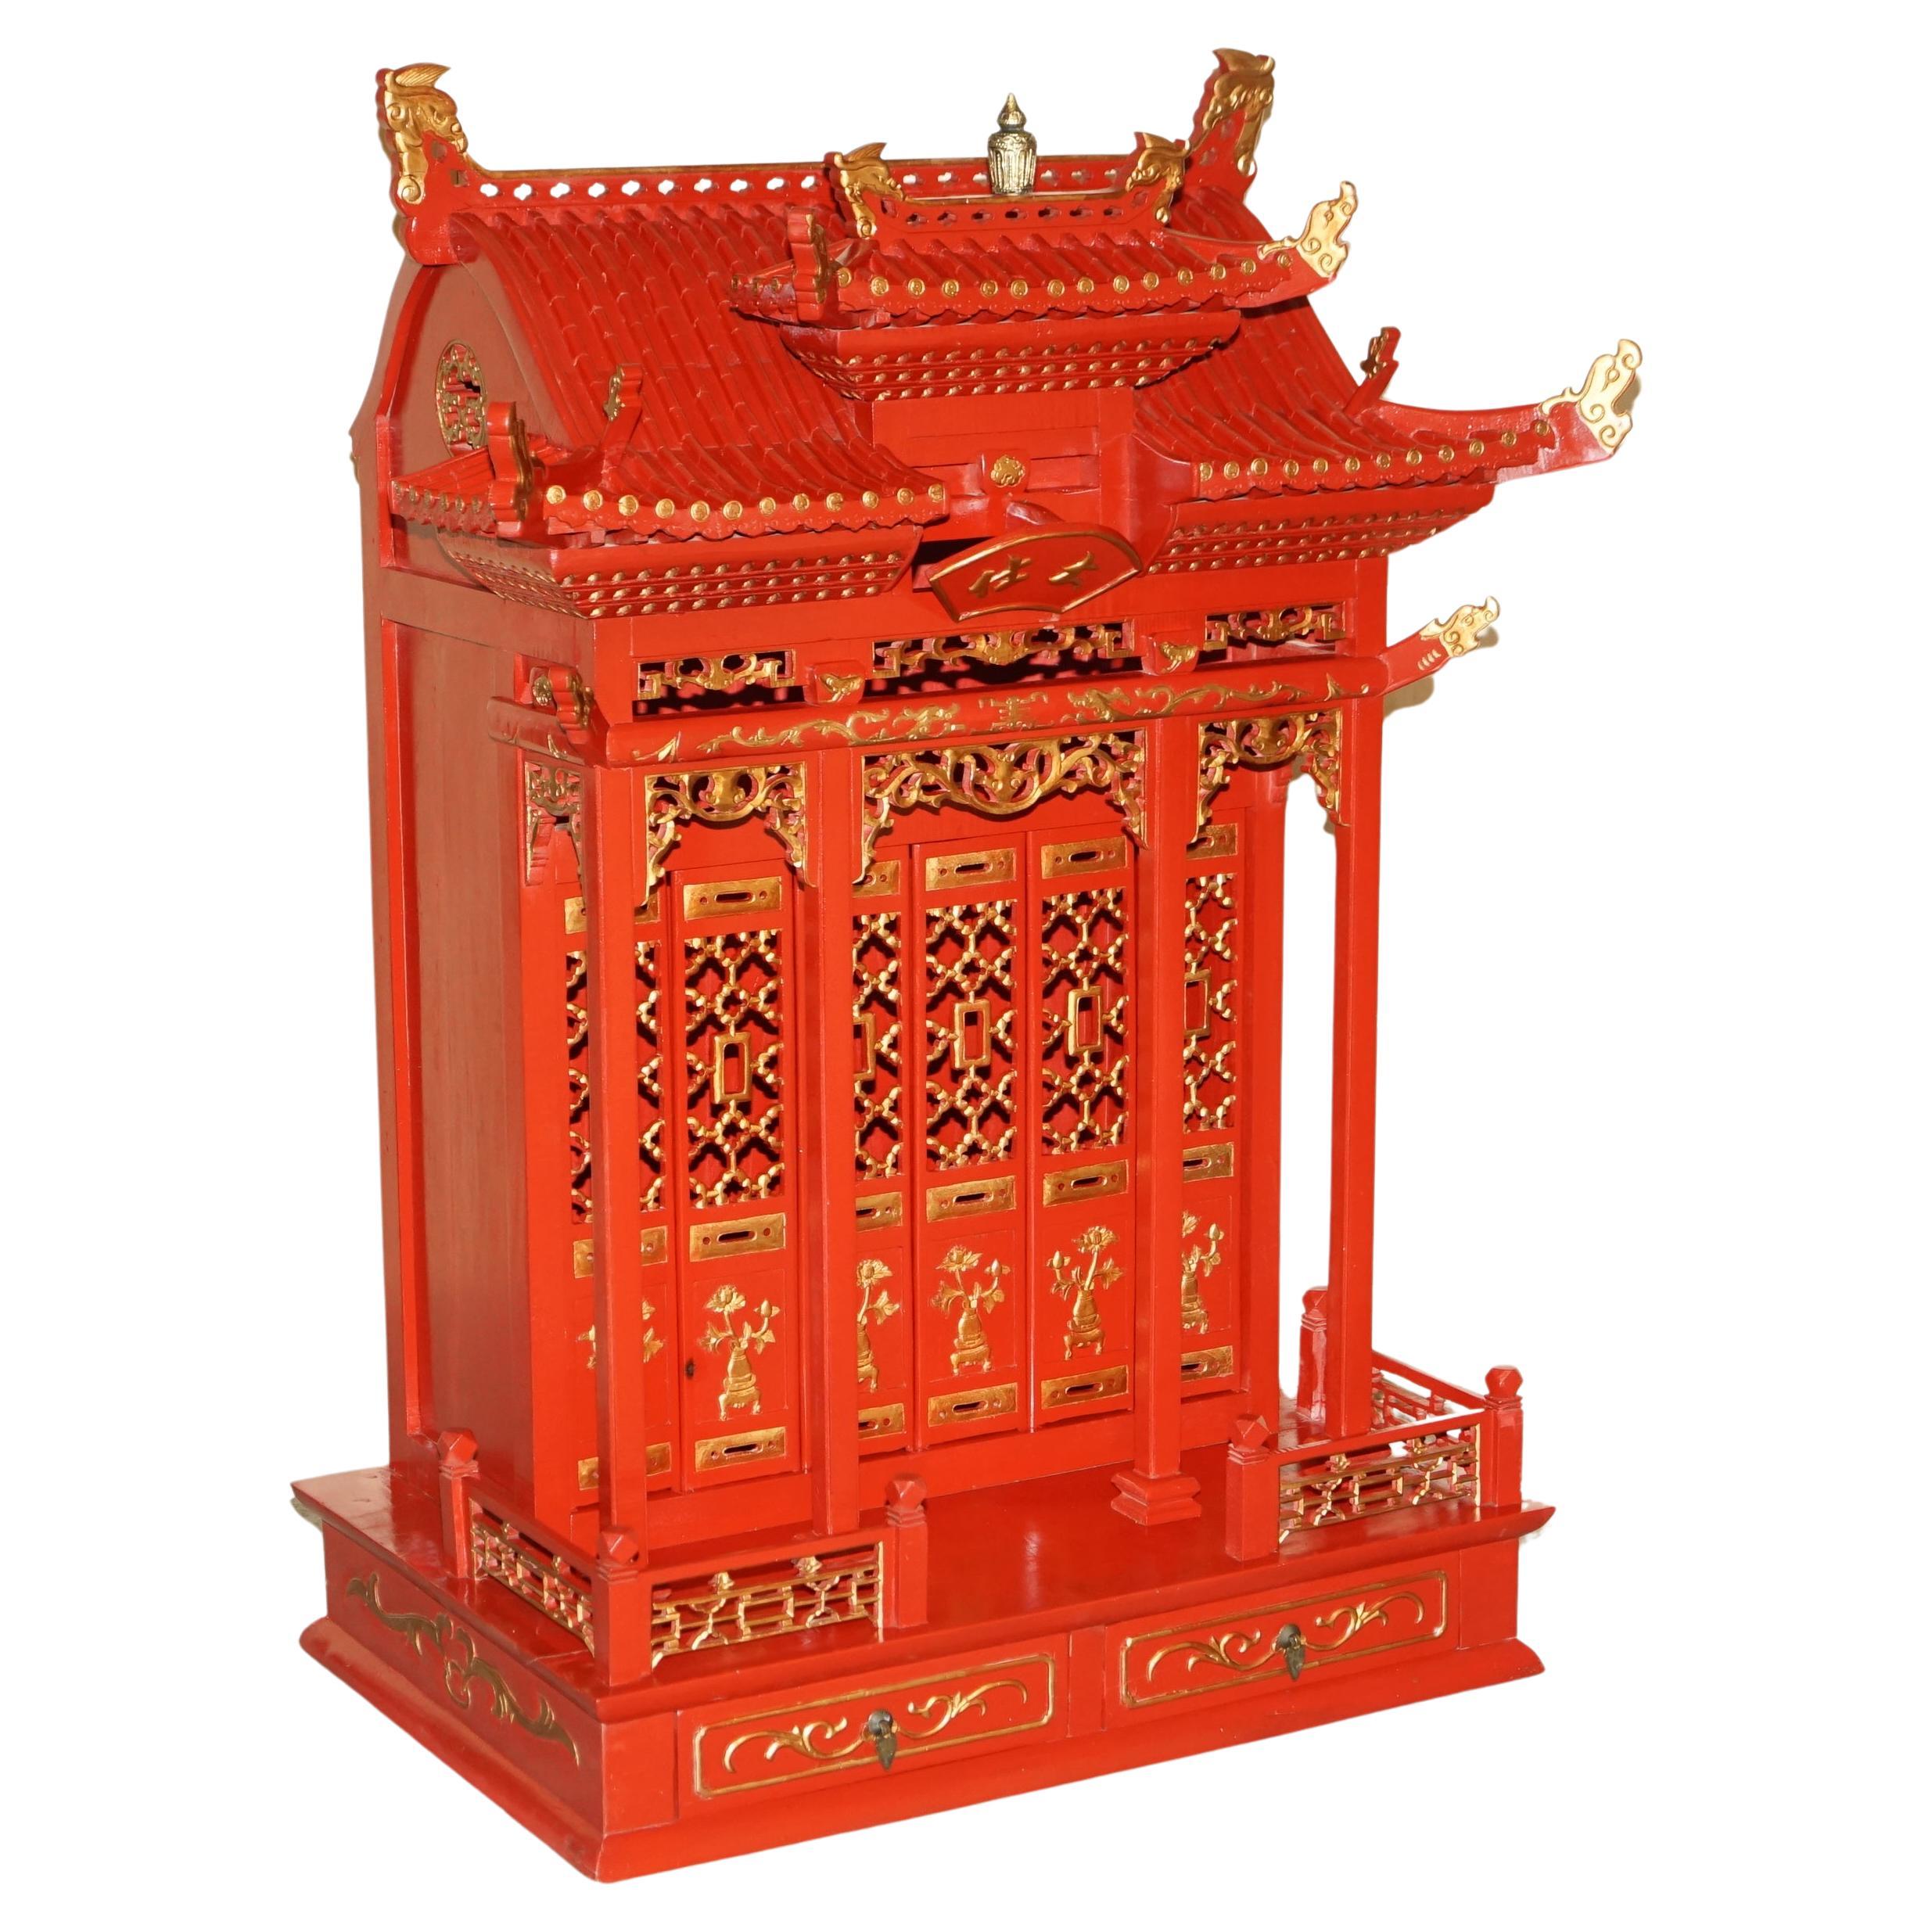 Rare Oriental Chinese Export Vintage Pagoda Top Red Cabinet Very Decorative For Sale